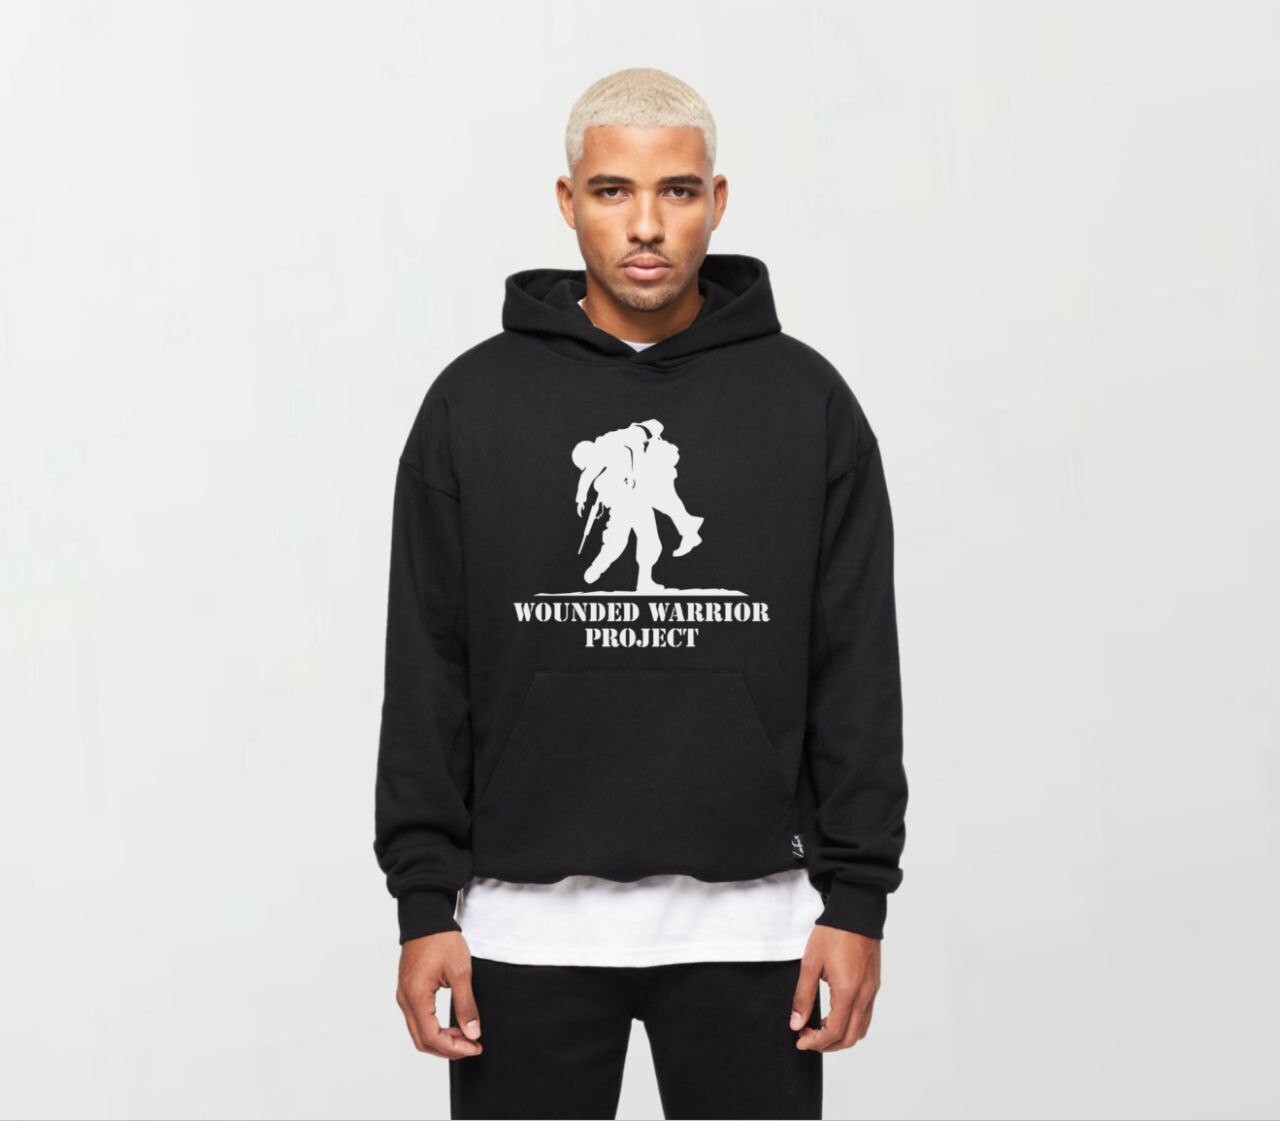 WWP_Elite Hoodie black
*ALL PROFITS ARE DONATED TO WWP*